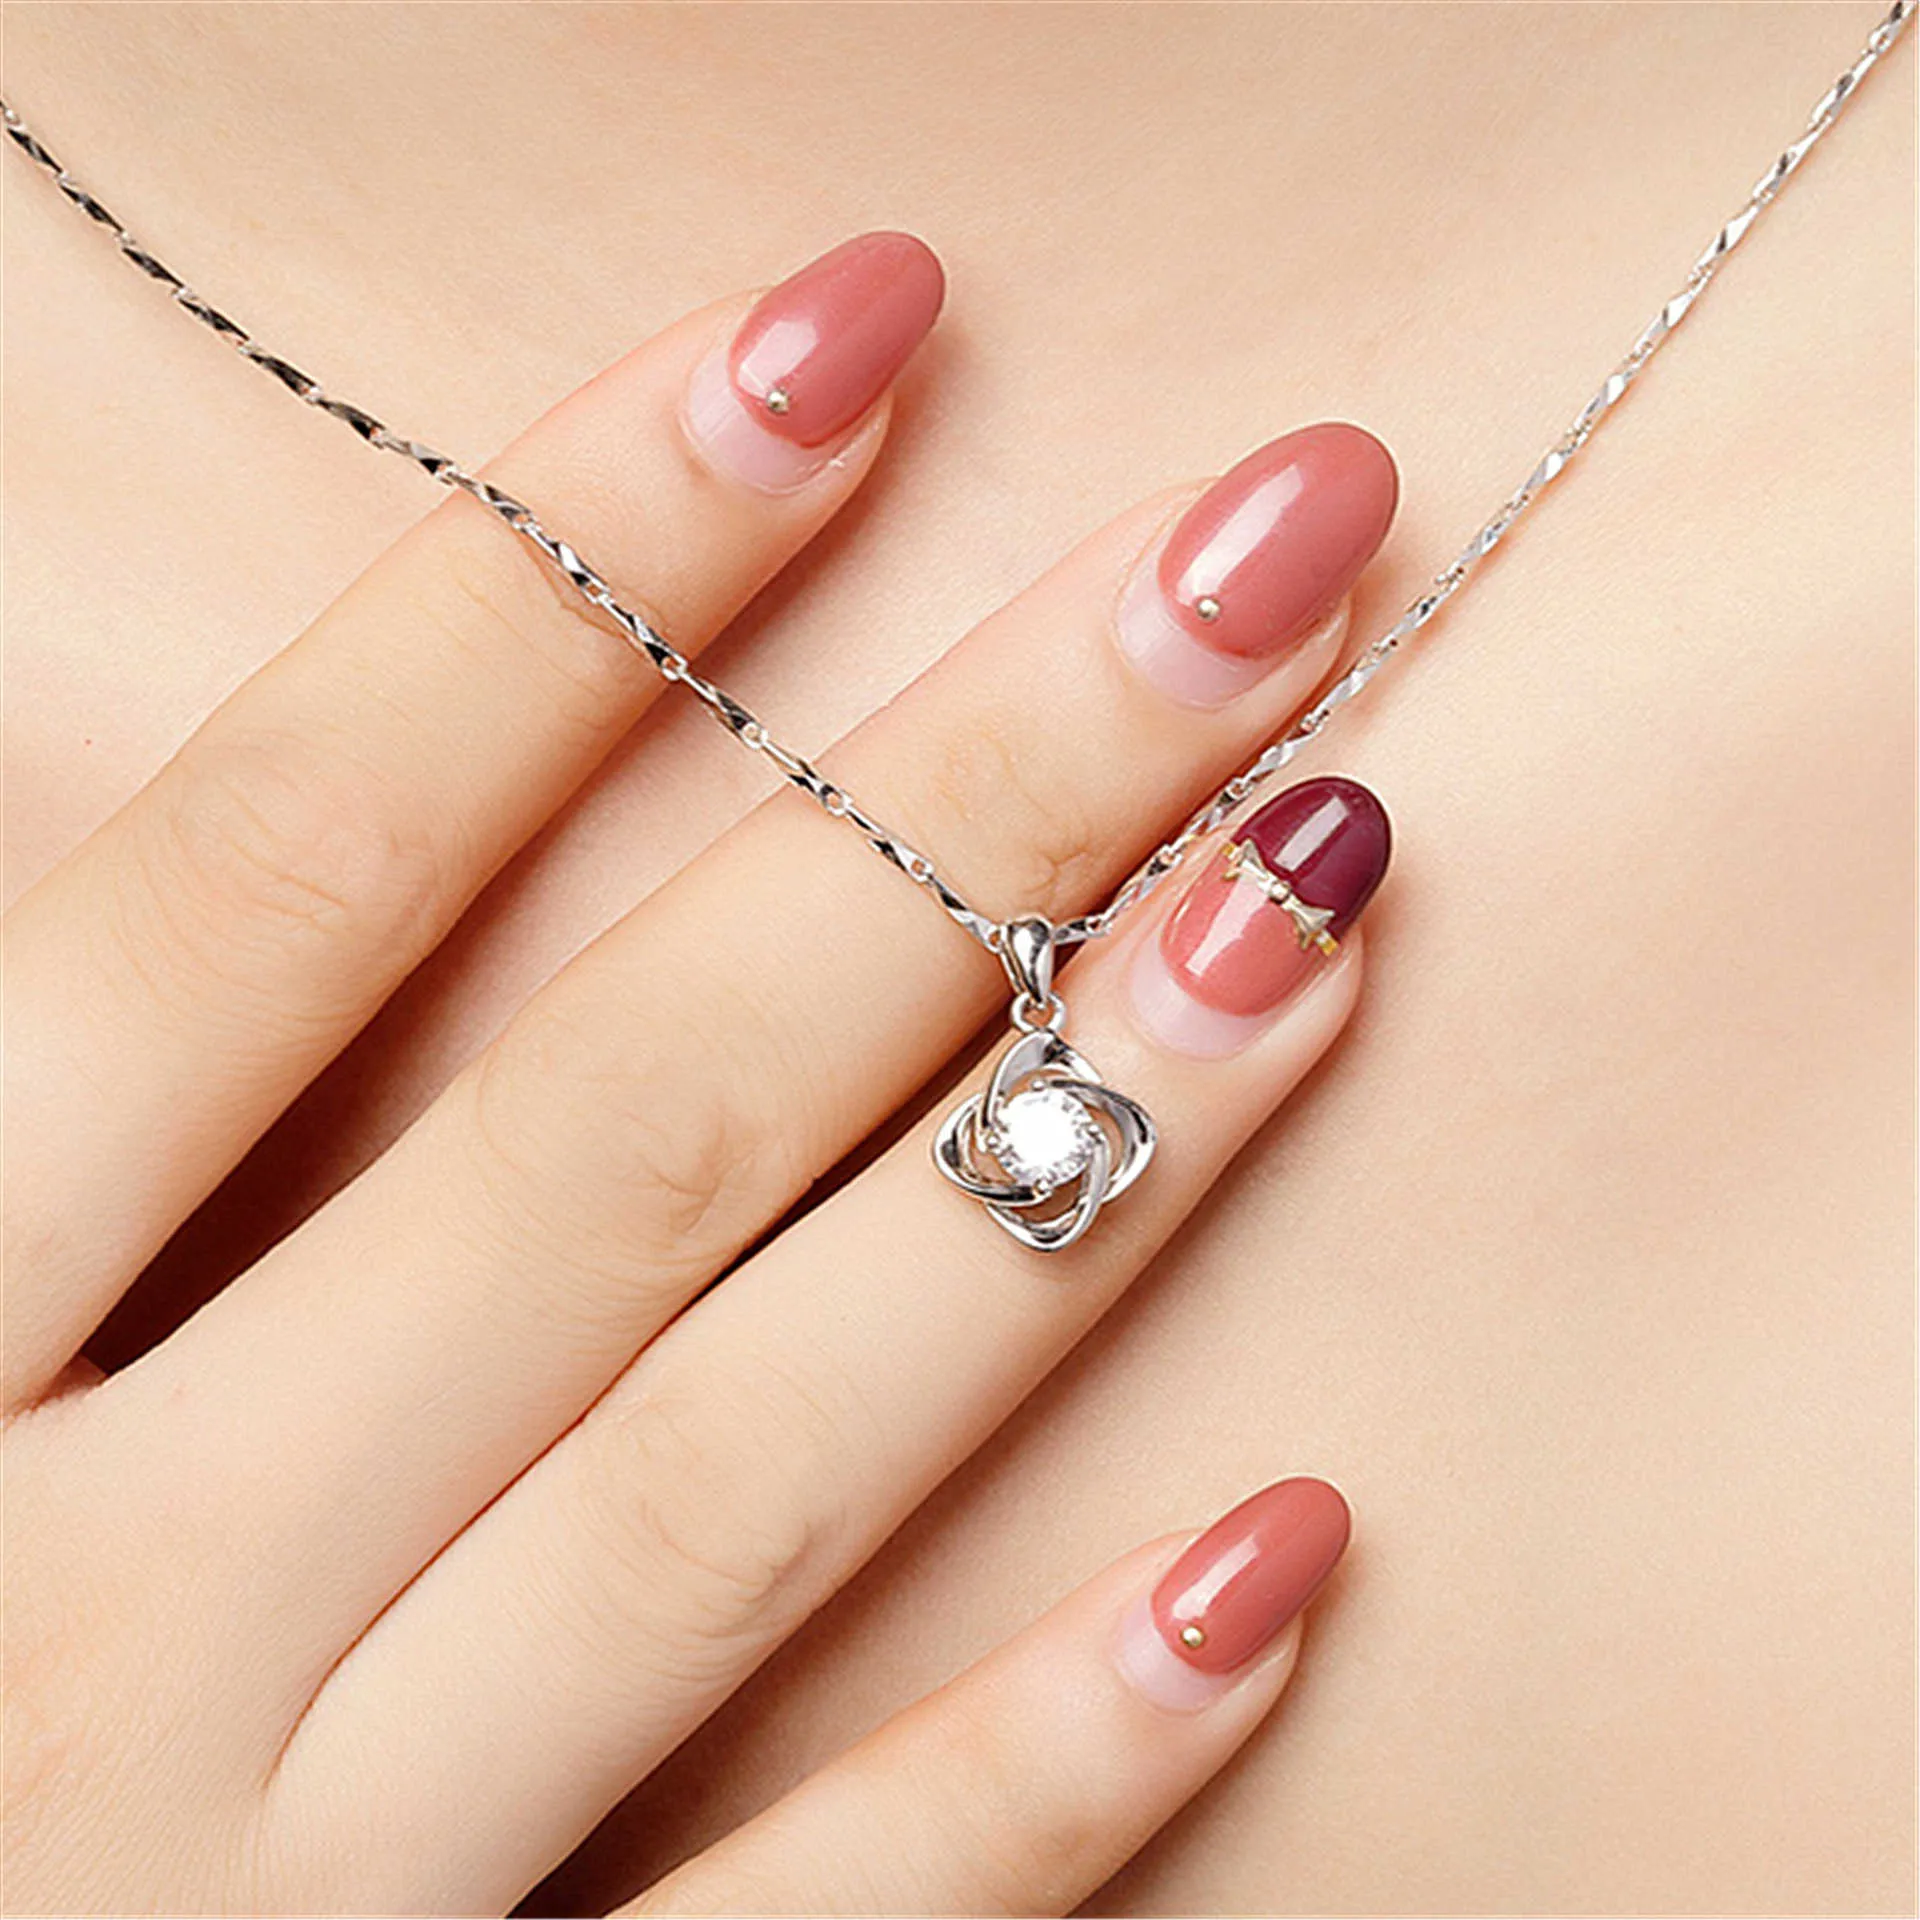 Crystal Womens Necklaces Pendant New Women's grass Fashion new simple clavicle Chain gold Silver Plated